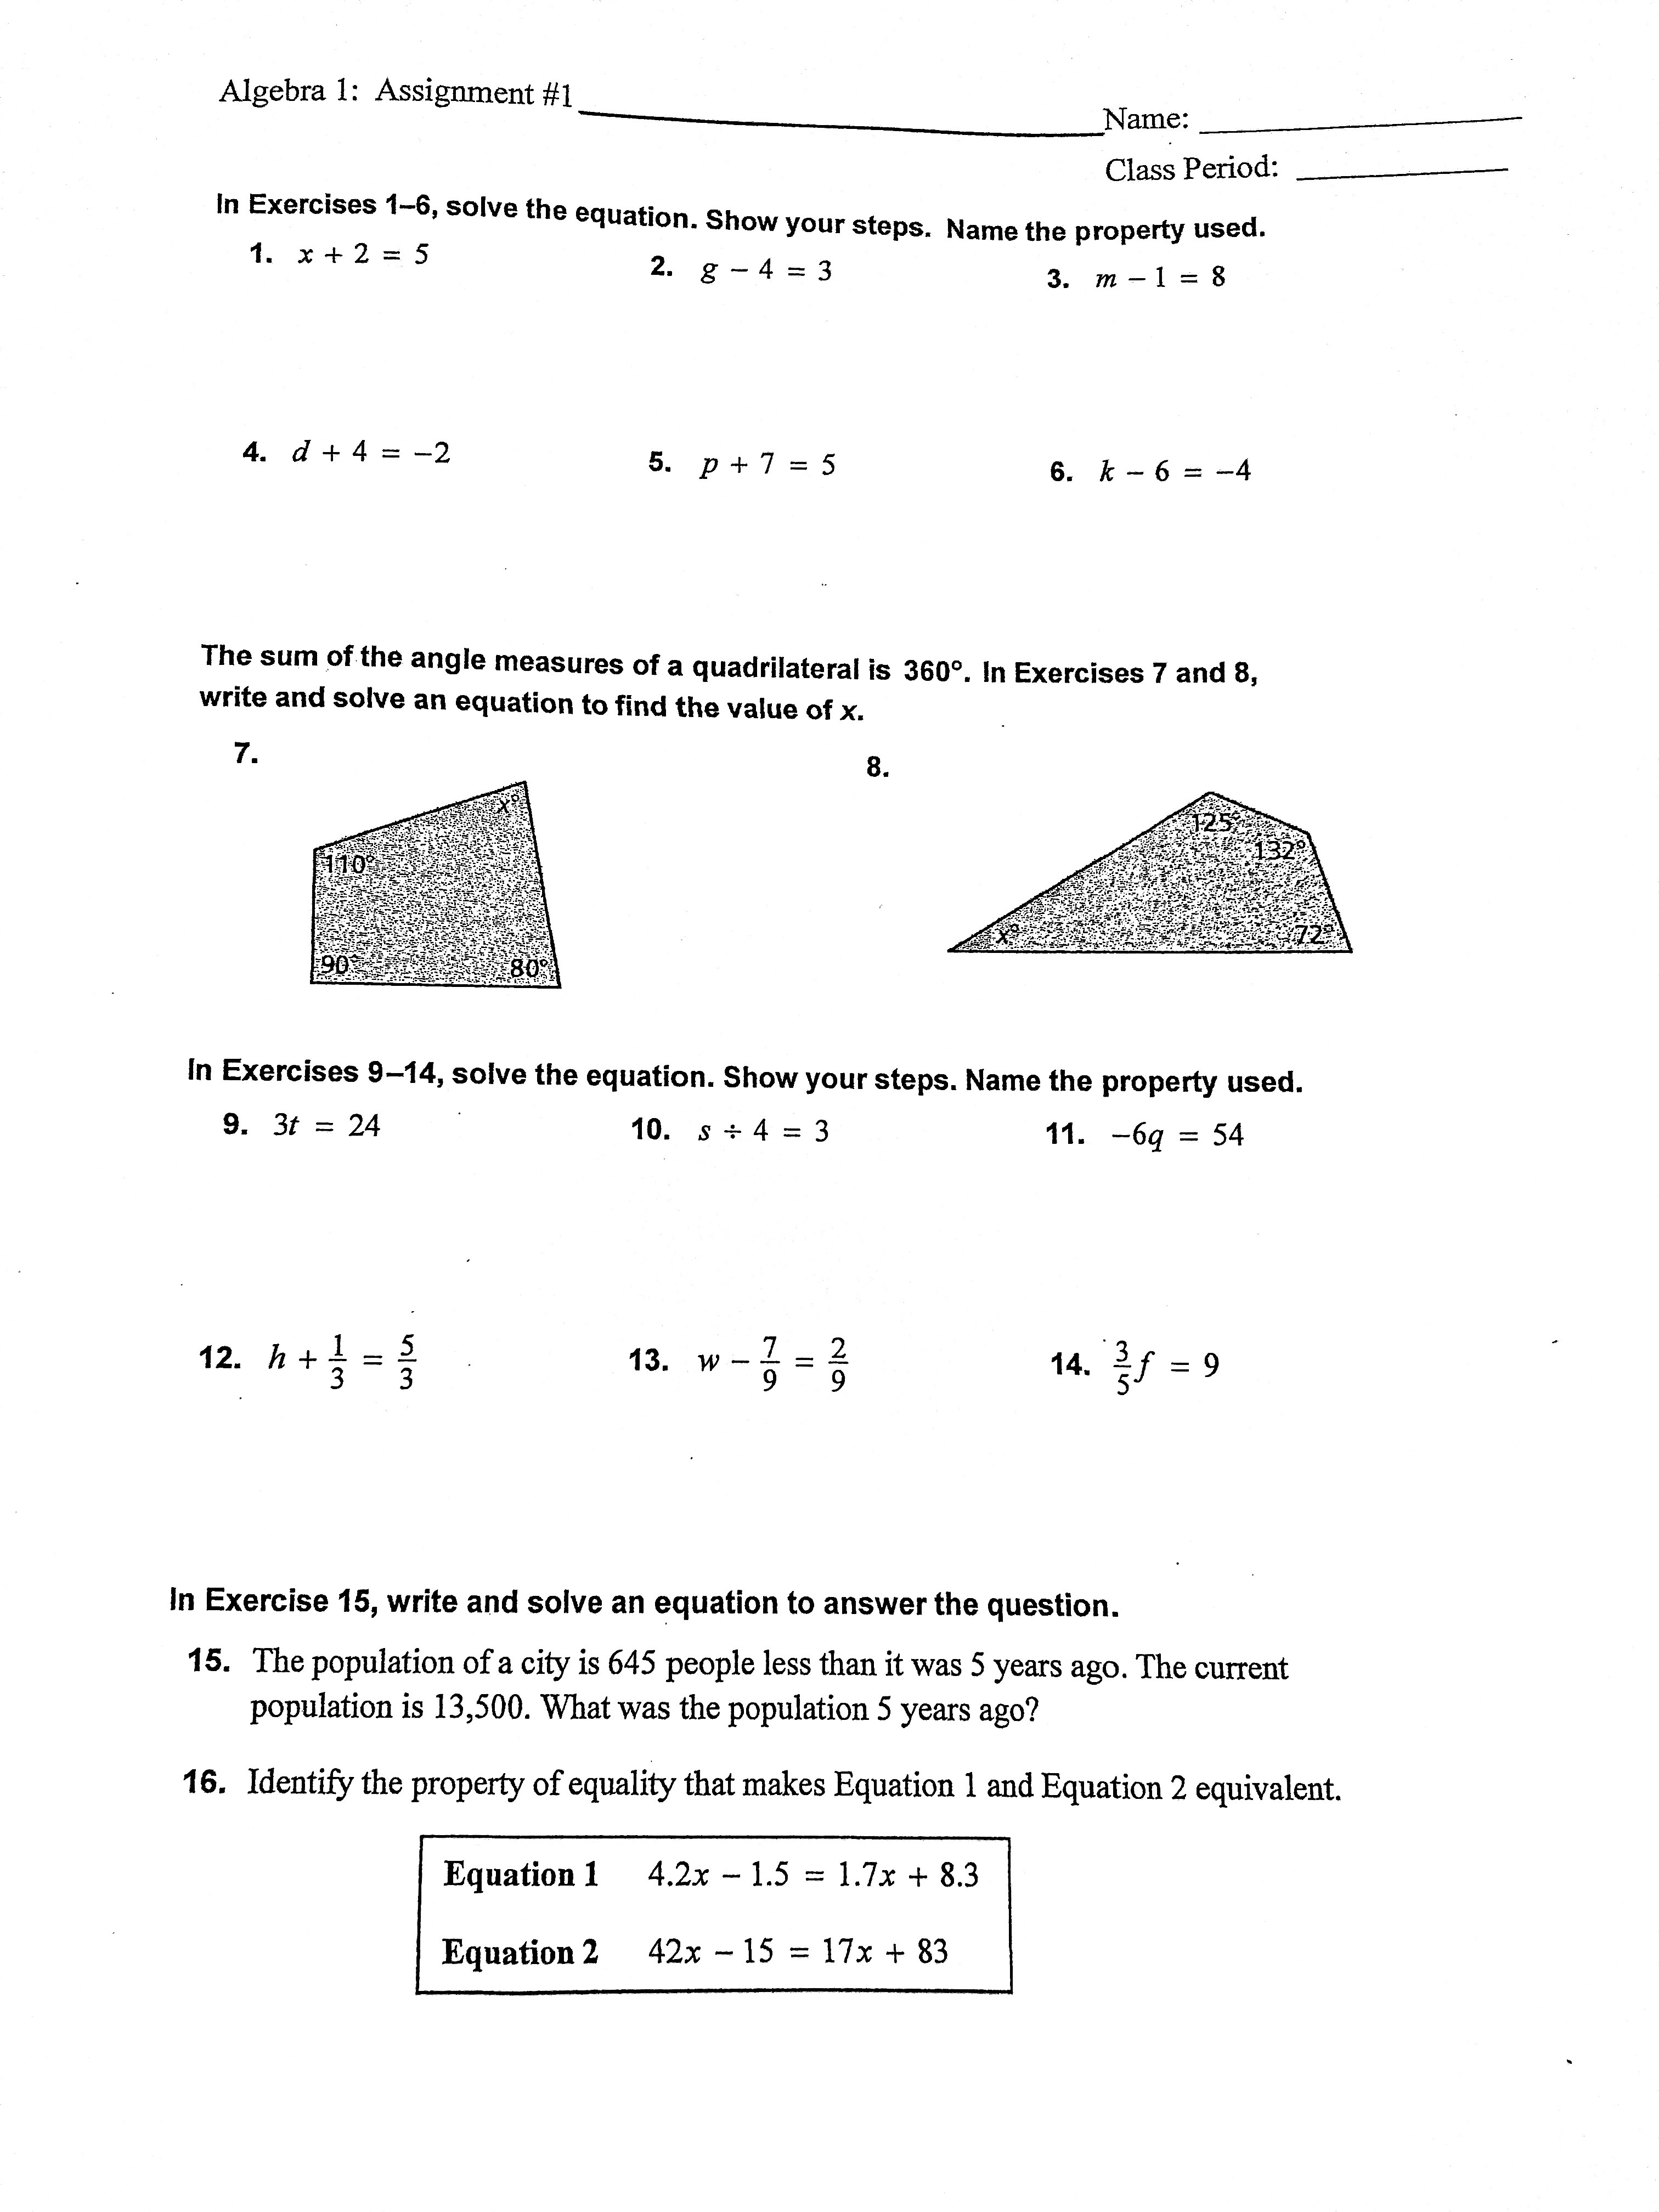 Lesson 8 Homework Practice Solving Multi-step Equations And Inequalities Answers